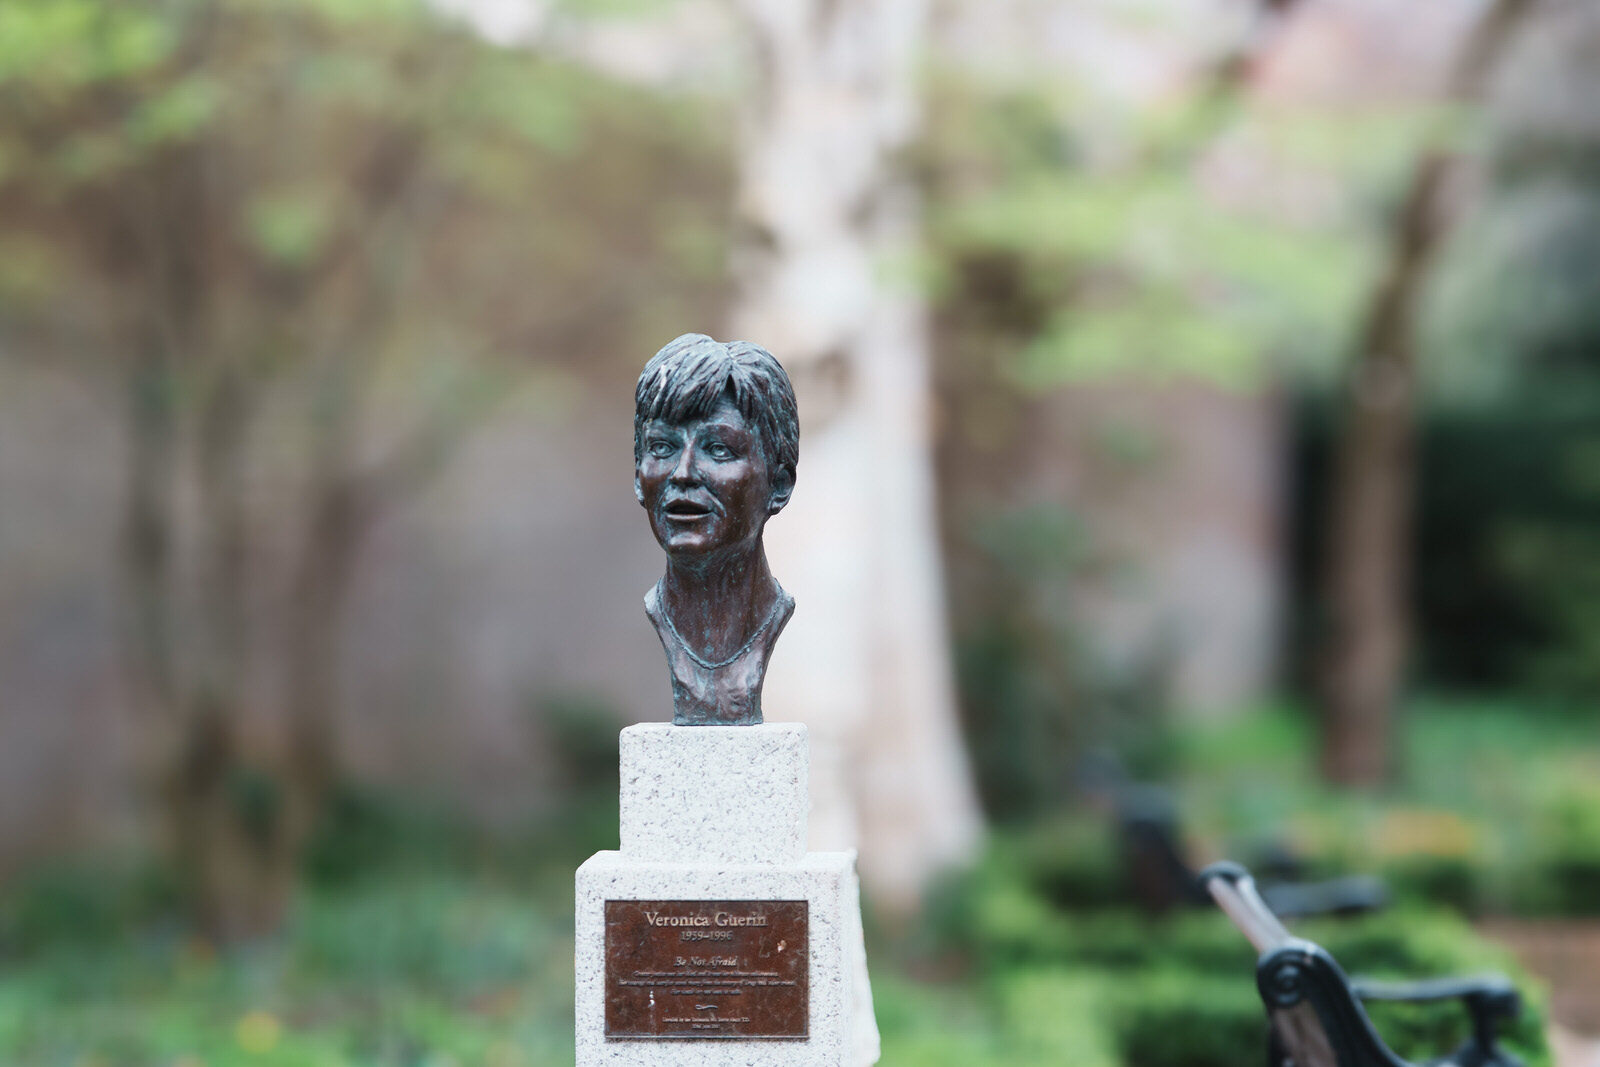 VERONICA GUERIN MEMORIAL [I USE THIS SCULPTURE AT DUBLIN CASTLE AS A REFERENCE]-229868-1